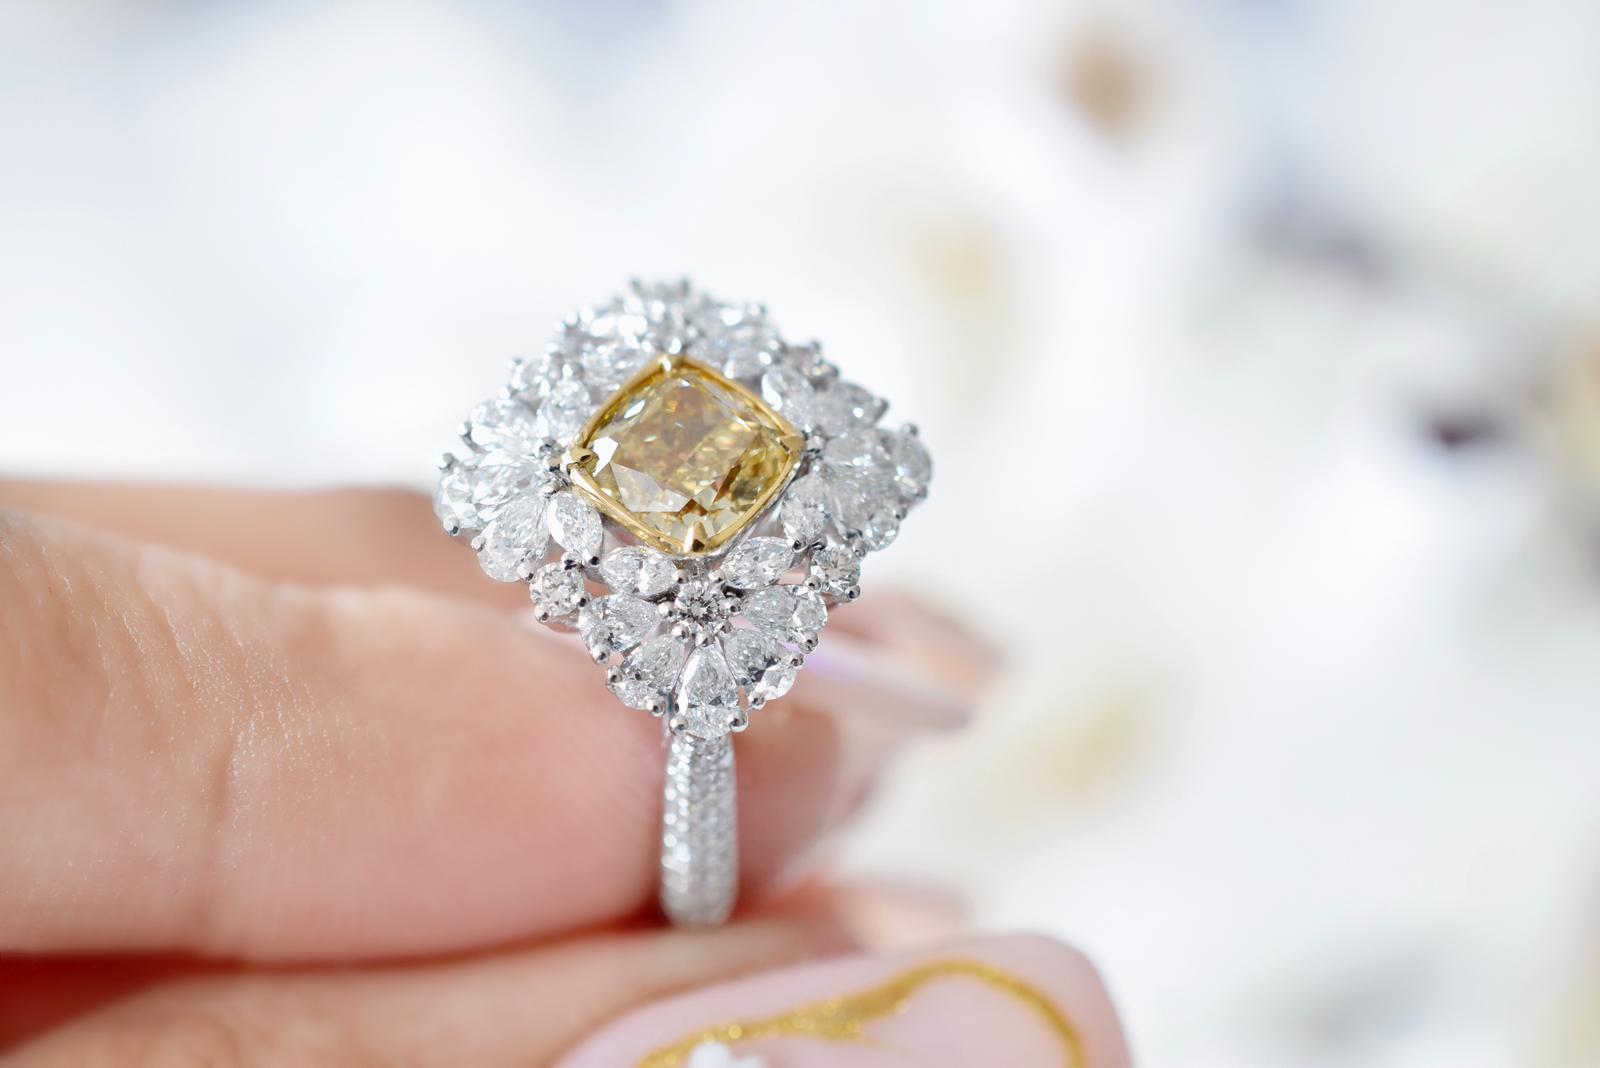 **100% NATURAL FANCY COLOUR DIAMOND JEWELLERIES**

✪ Jewelry Details ✪

♦ MAIN STONE DETAILS

➛ Stone Shape: Cushion
➛ Stone Color: Fancy Brownish Yellow
➛ Stone Weight: 1.12 carats
➛ Clarity: VVS1
➛ GIA certified

♦ SIDE STONE DETAILS

➛ Side white